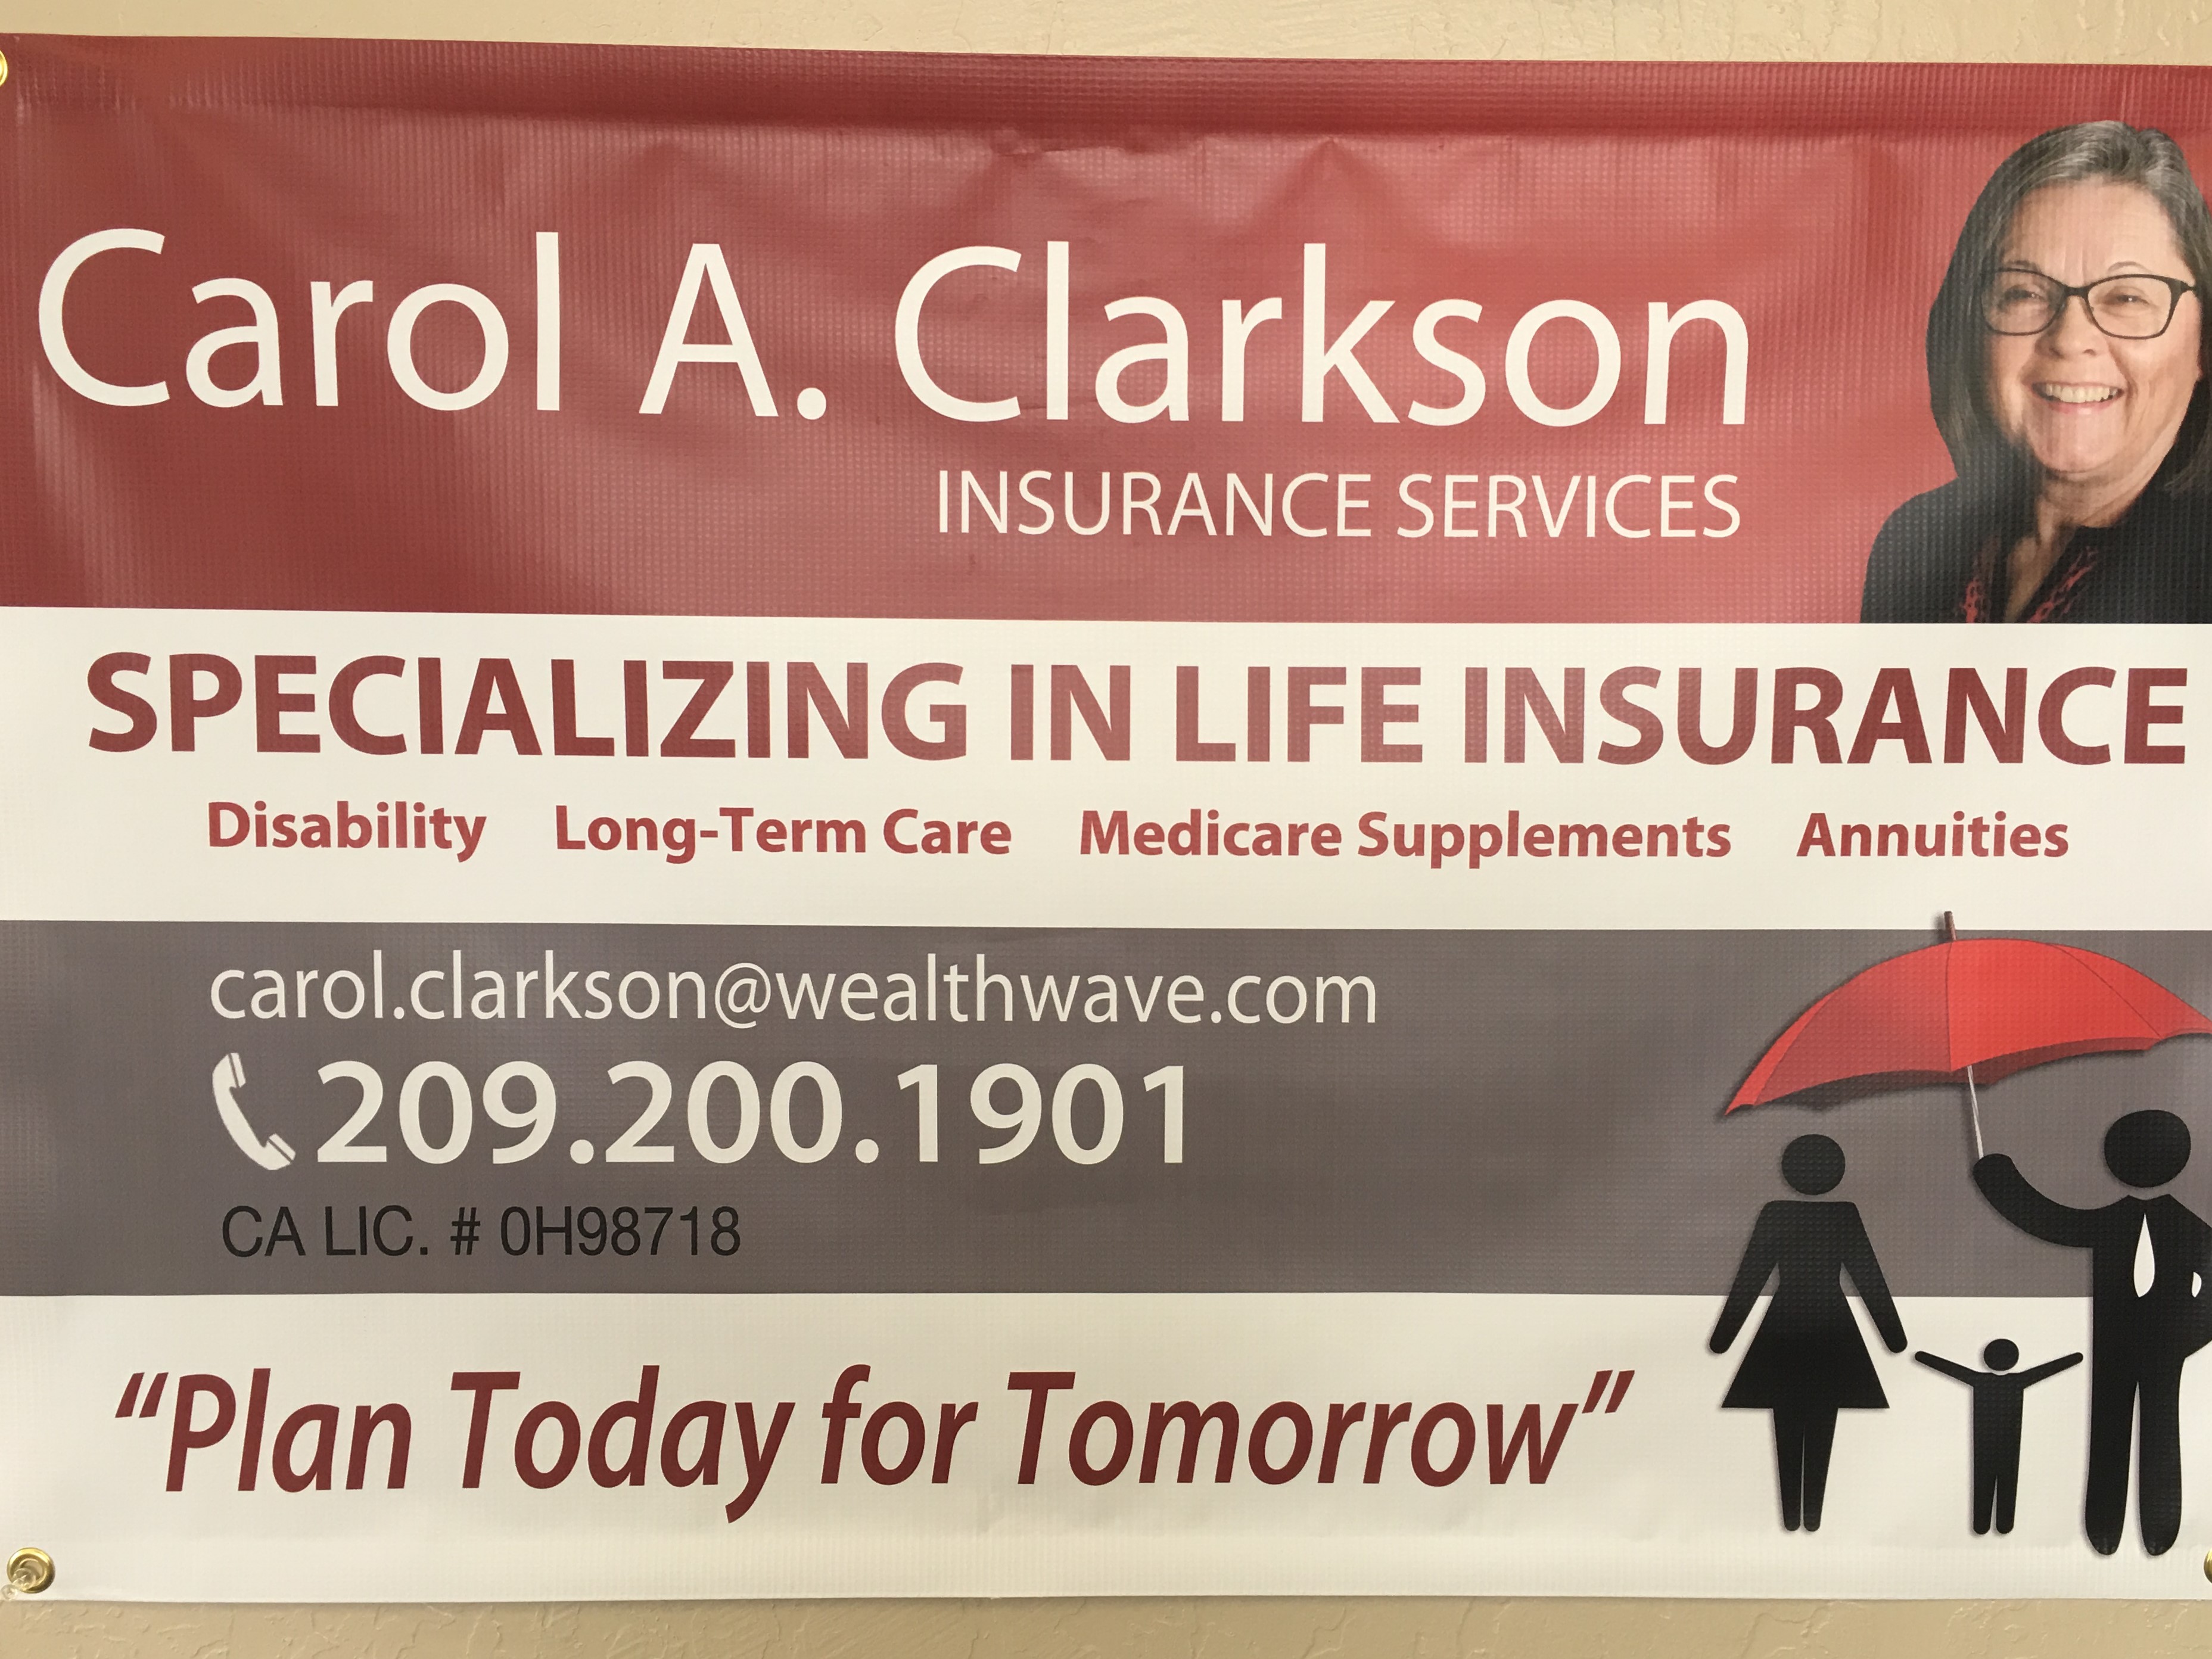 Carol A. Clarkson Independent Insurance Agent | 310 N Cluff Ave Ste C210, Lodi, CA, 95240 | +1 (209) 200-1901